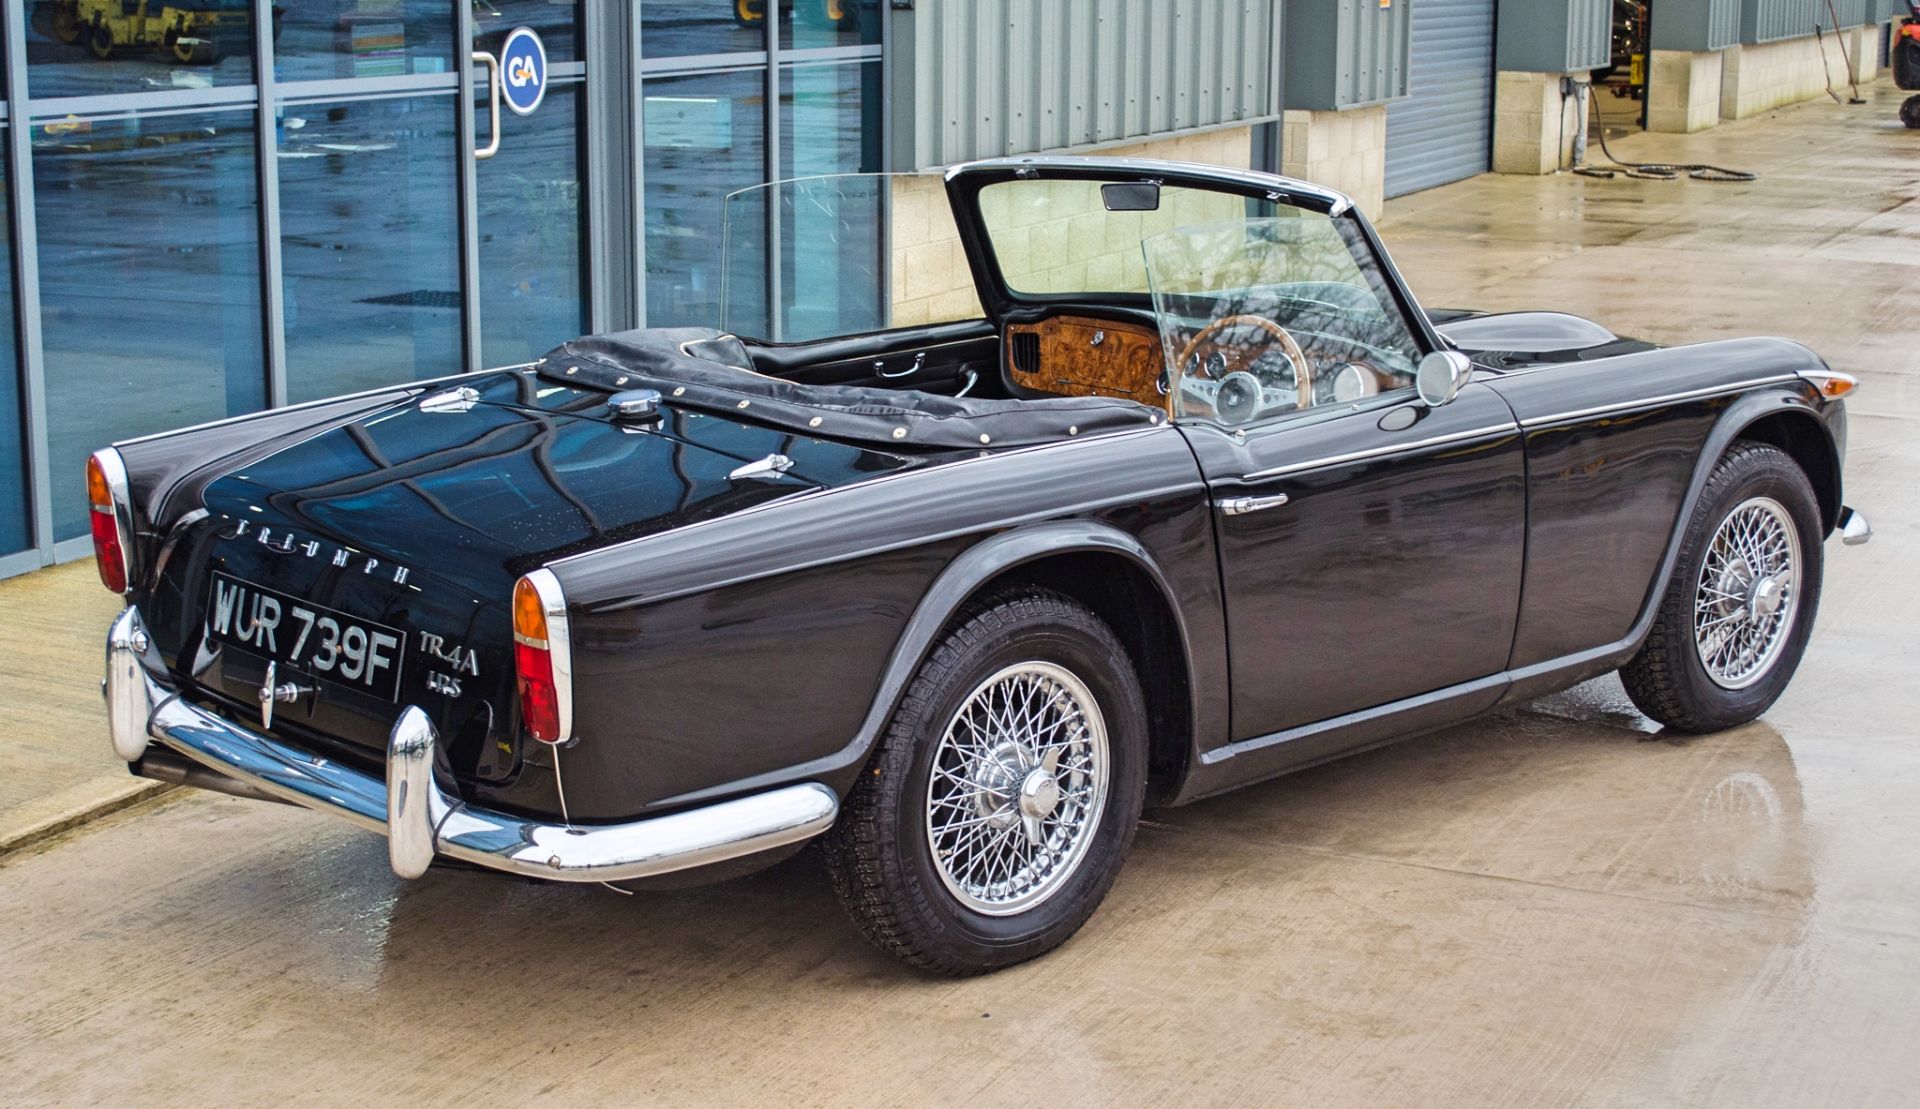 1967 Triumph TR4A IRS 2135cc convertible - Image 6 of 56